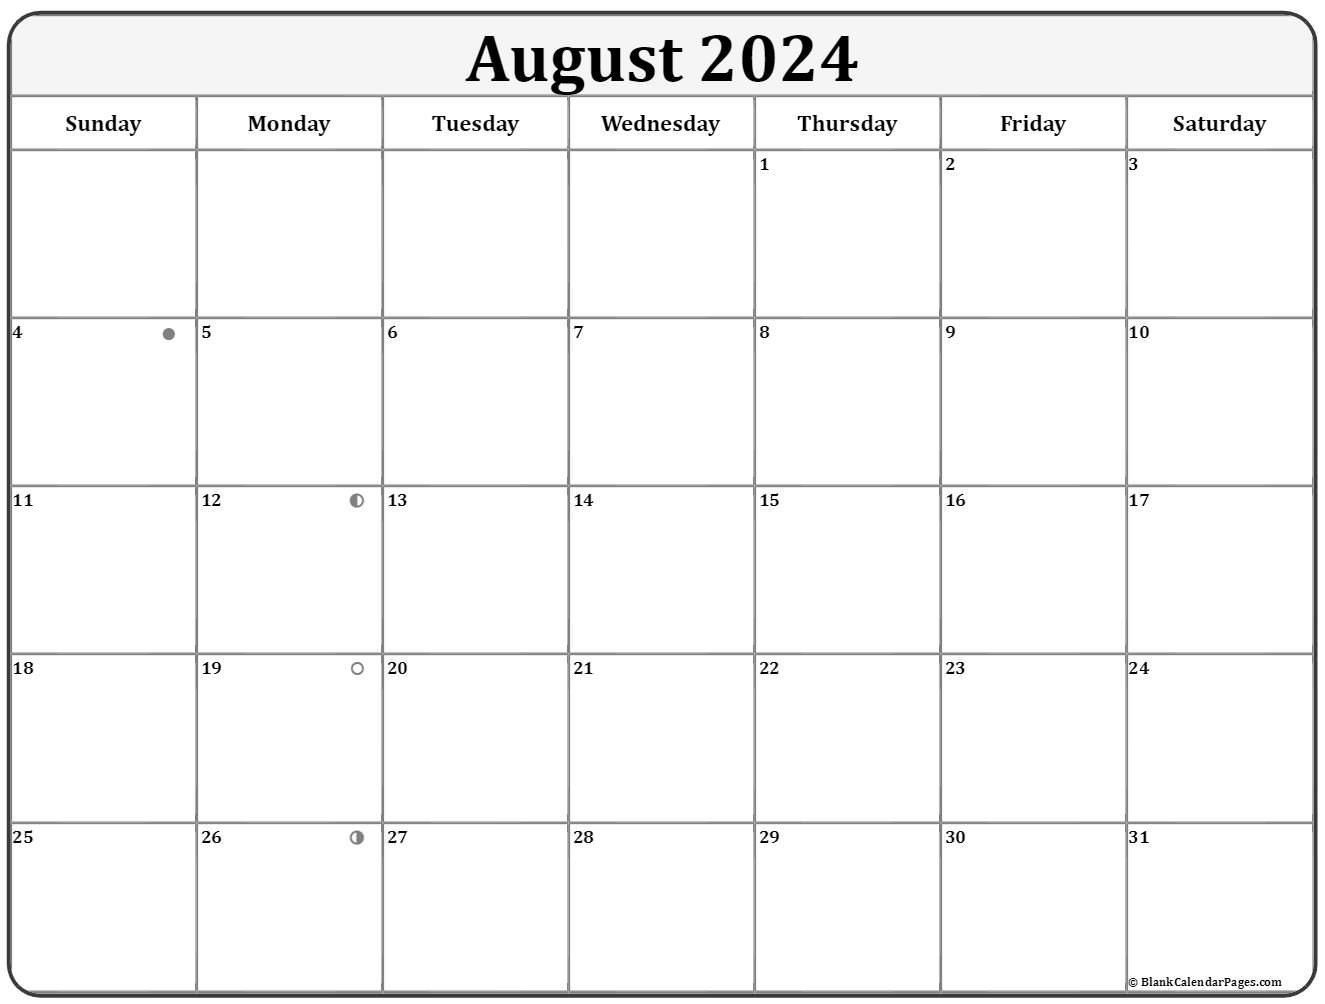 shine and the moonbeams calendar august 2021 August 2021 Lunar Calendar Moon Phase Calendar shine and the moonbeams calendar august 2021